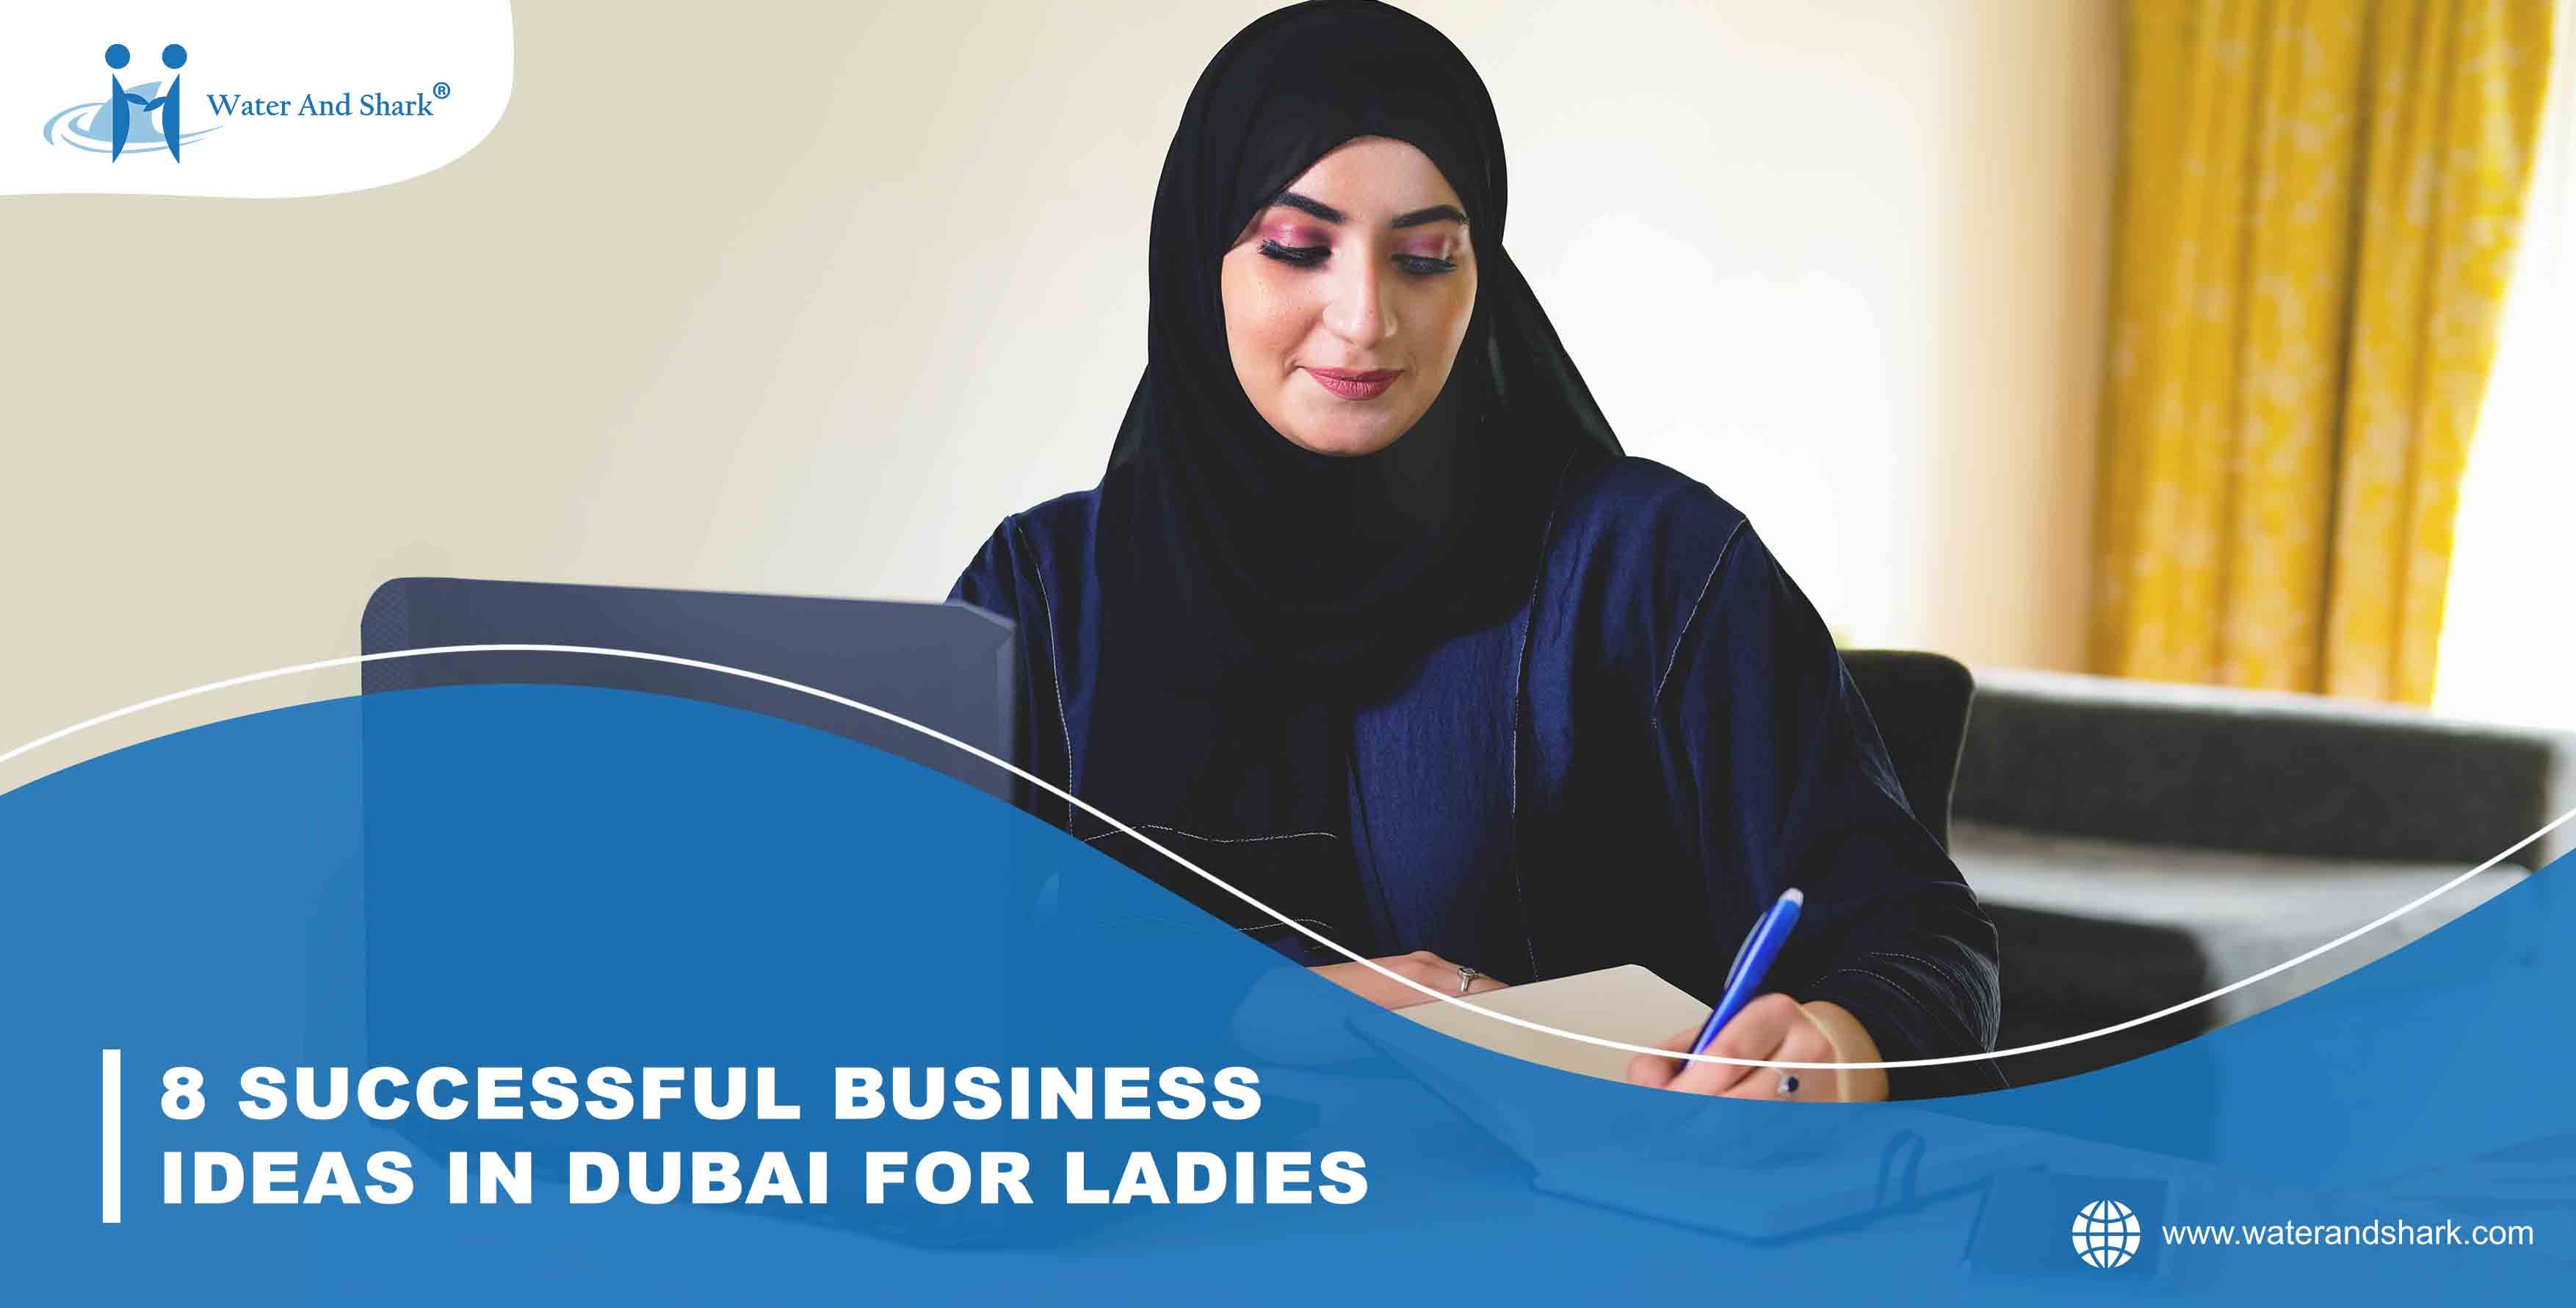 650x1280_8_SUCCESSFUL_BUSINESS_IDEAS_IN_DUBAI_FOR_LADIES_low_size.jpg